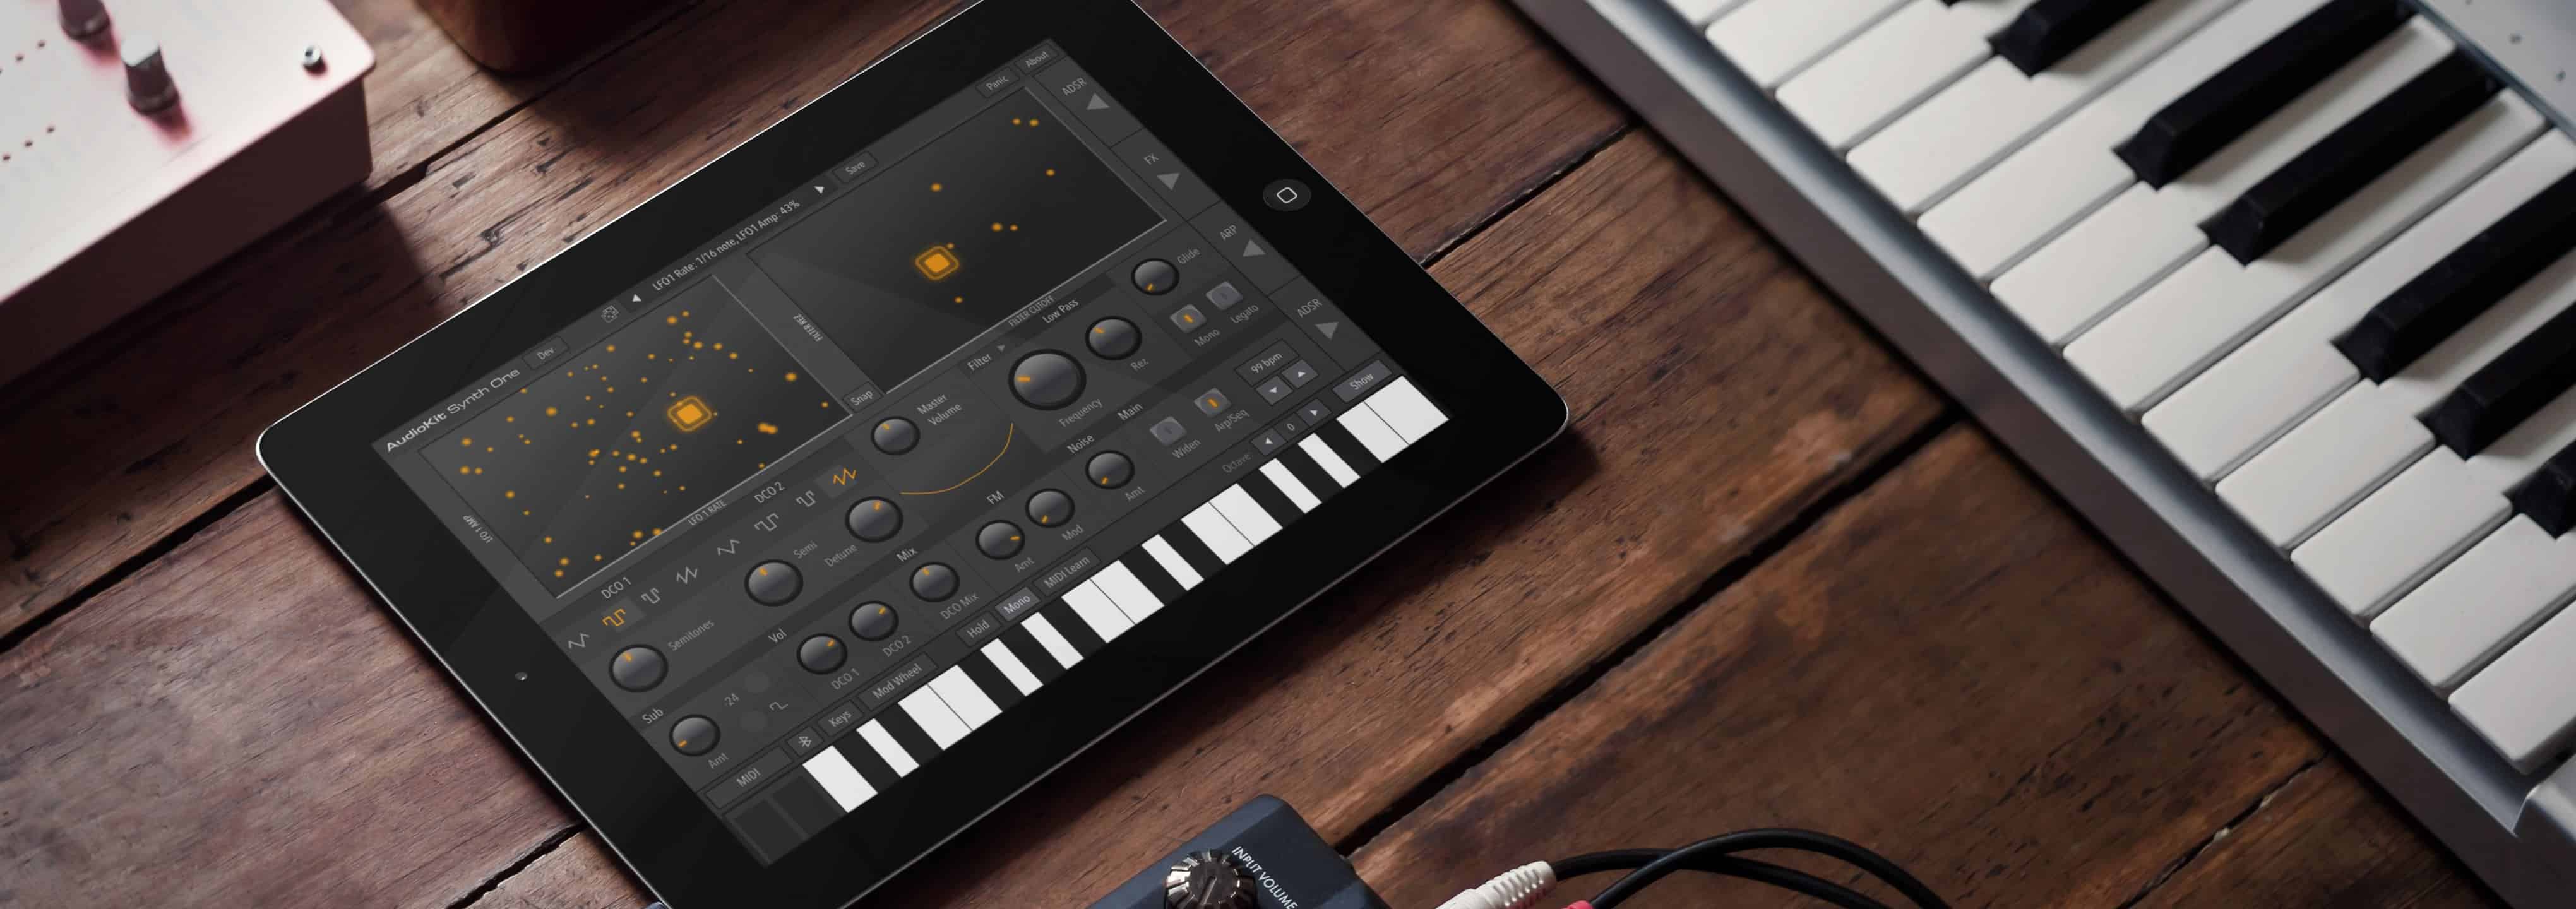 Synth One is an incredible synth app for iOS.